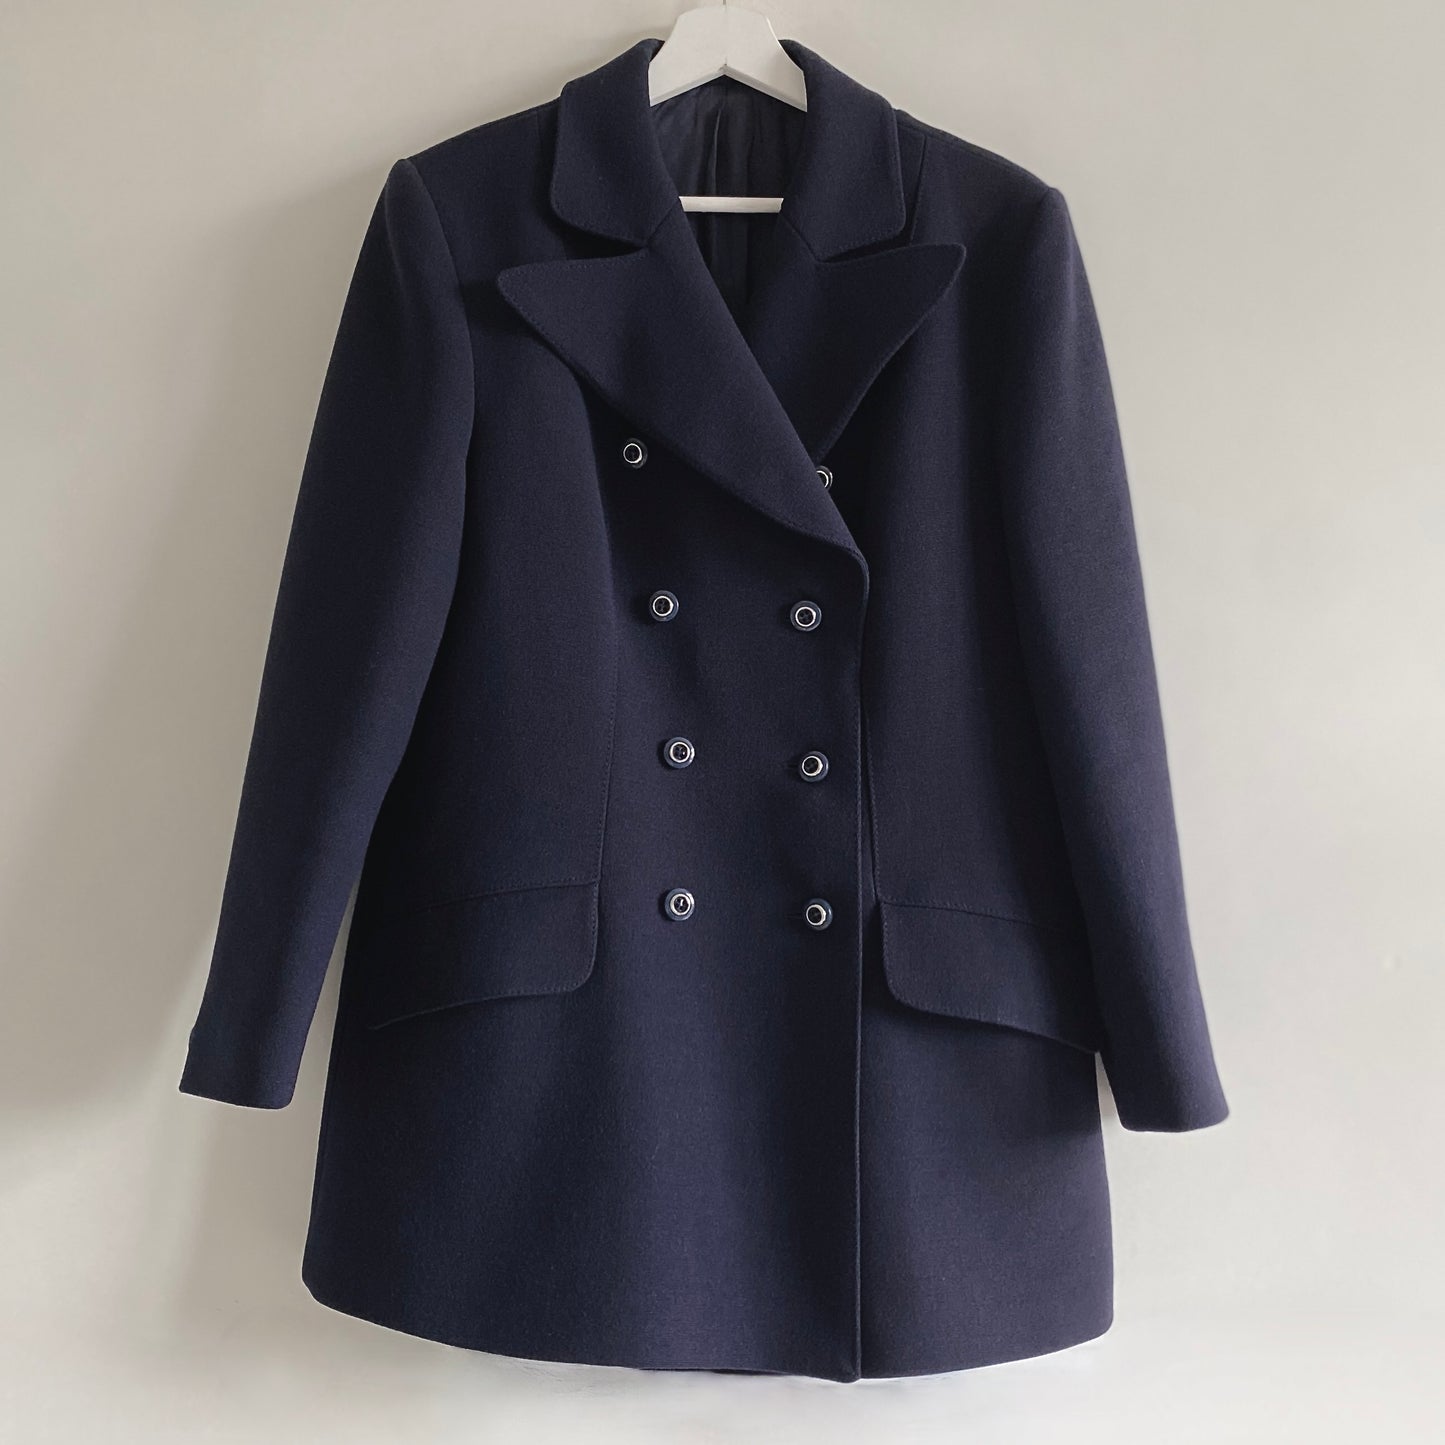 Vintage 70s navy pea coat style wool coat/jacket Double breasted front button fastening Two front flap pockets Single button detail to cuff 100% Pure New Wool Fully lined